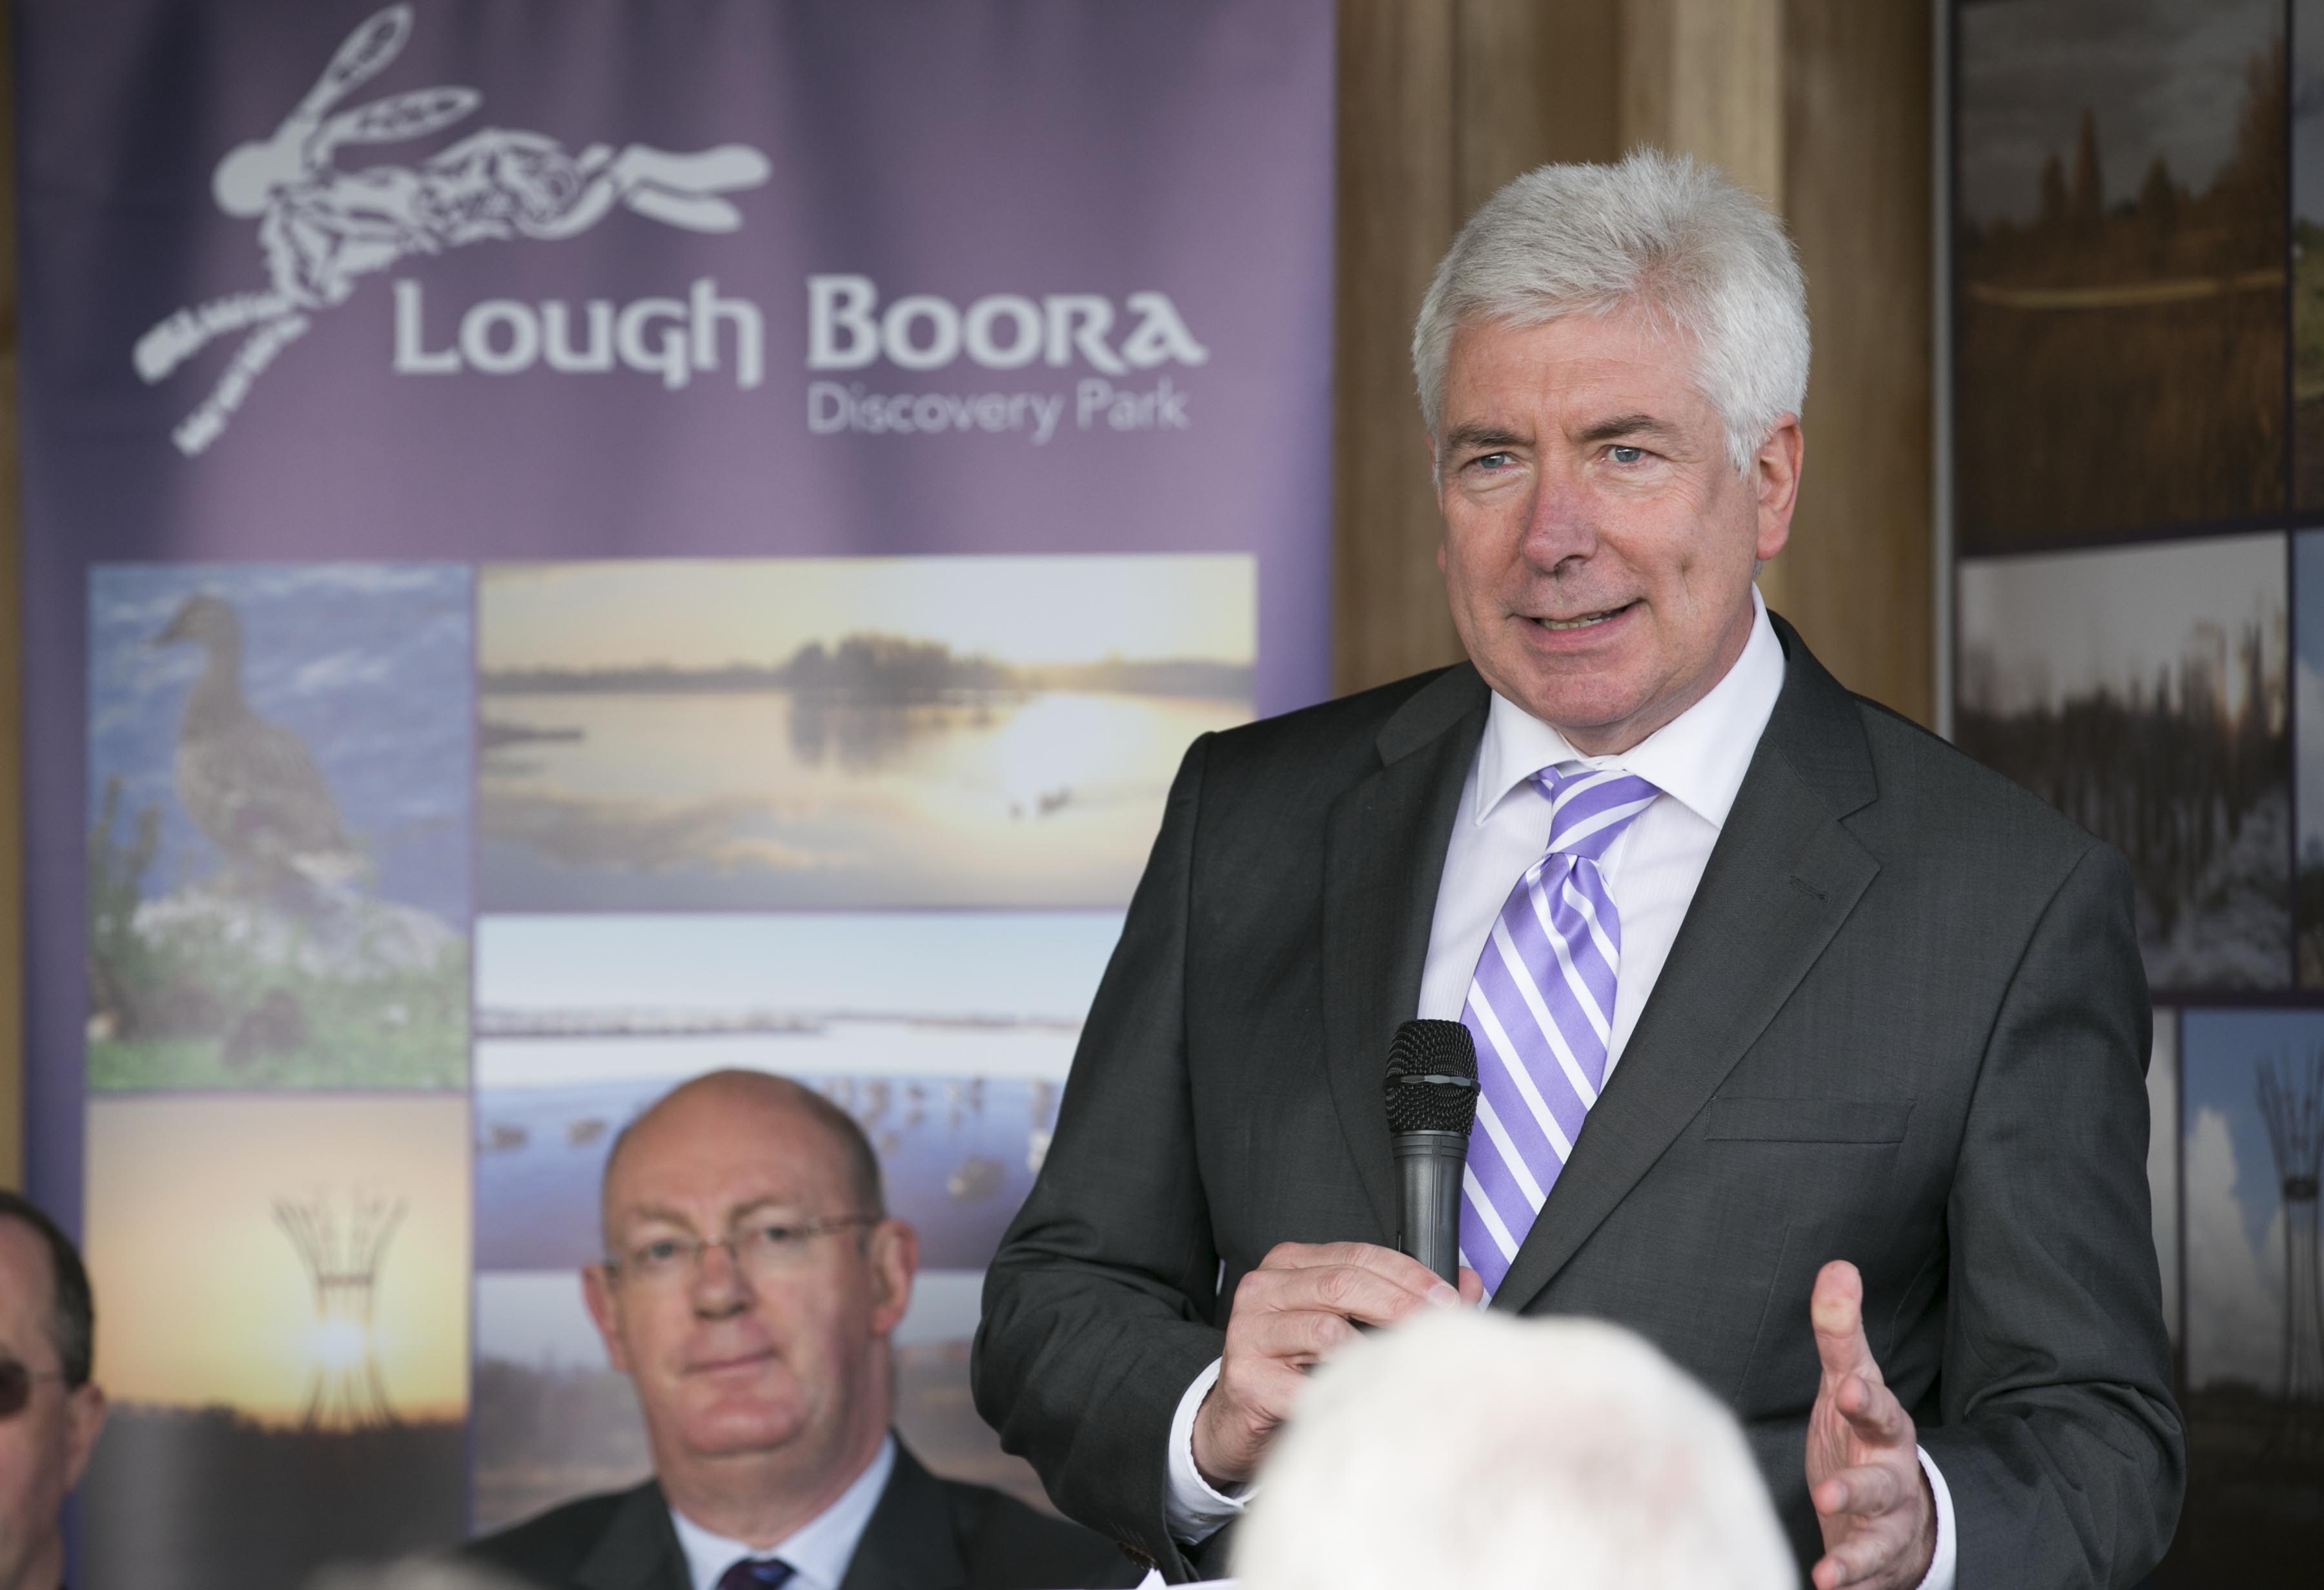 Minister for Communications, Energy and Natural Resources, Alex White speaking at the official opening Bord na Móna’s new €1.5 million euro development, which sees a new visitor centre and facilities’ in Lough Boora Discovery Park, Co. Offaly